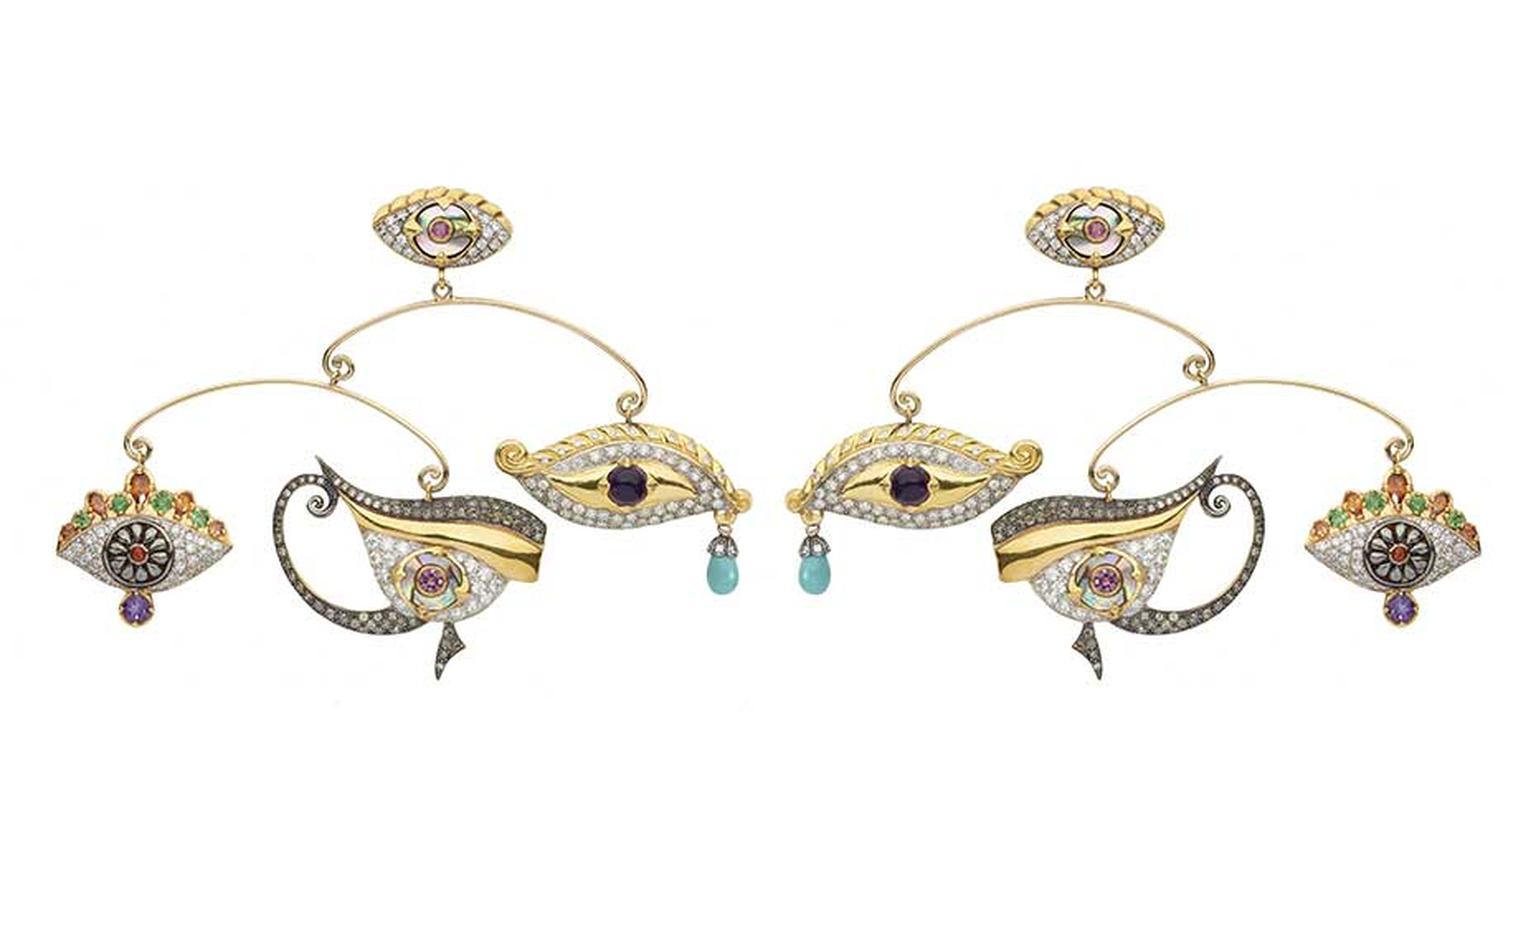 Sylvie Corbelin Fascination collection mobile earrings featuring three gem-encrusted eyes suspended from a central stud, also in the shape of an eye.